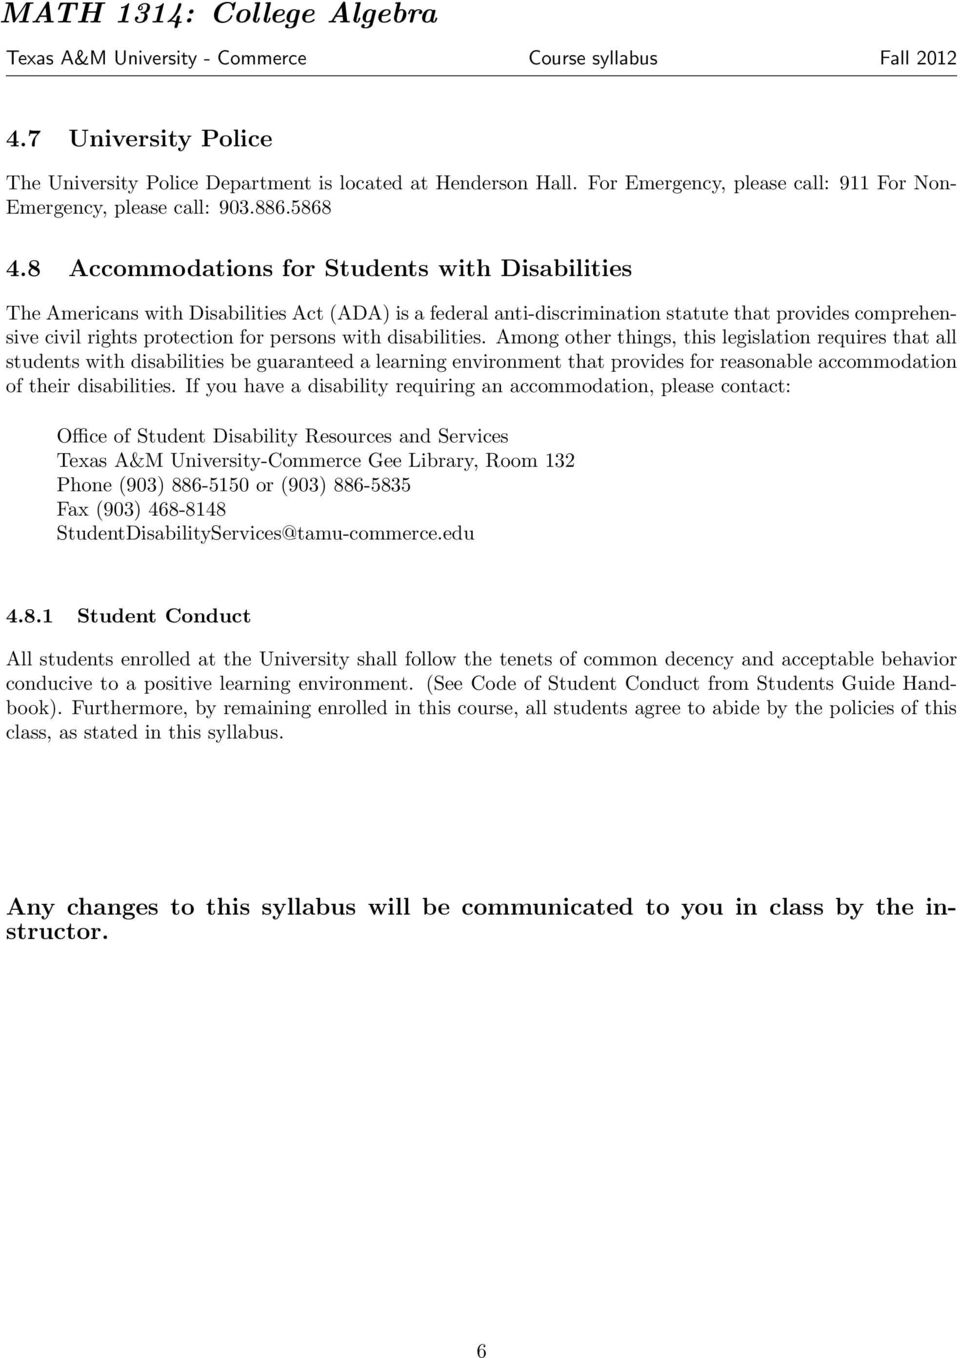 disabilities. Among other things, this legislation requires that all students with disabilities be guaranteed a learning environment that provides for reasonable accommodation of their disabilities.